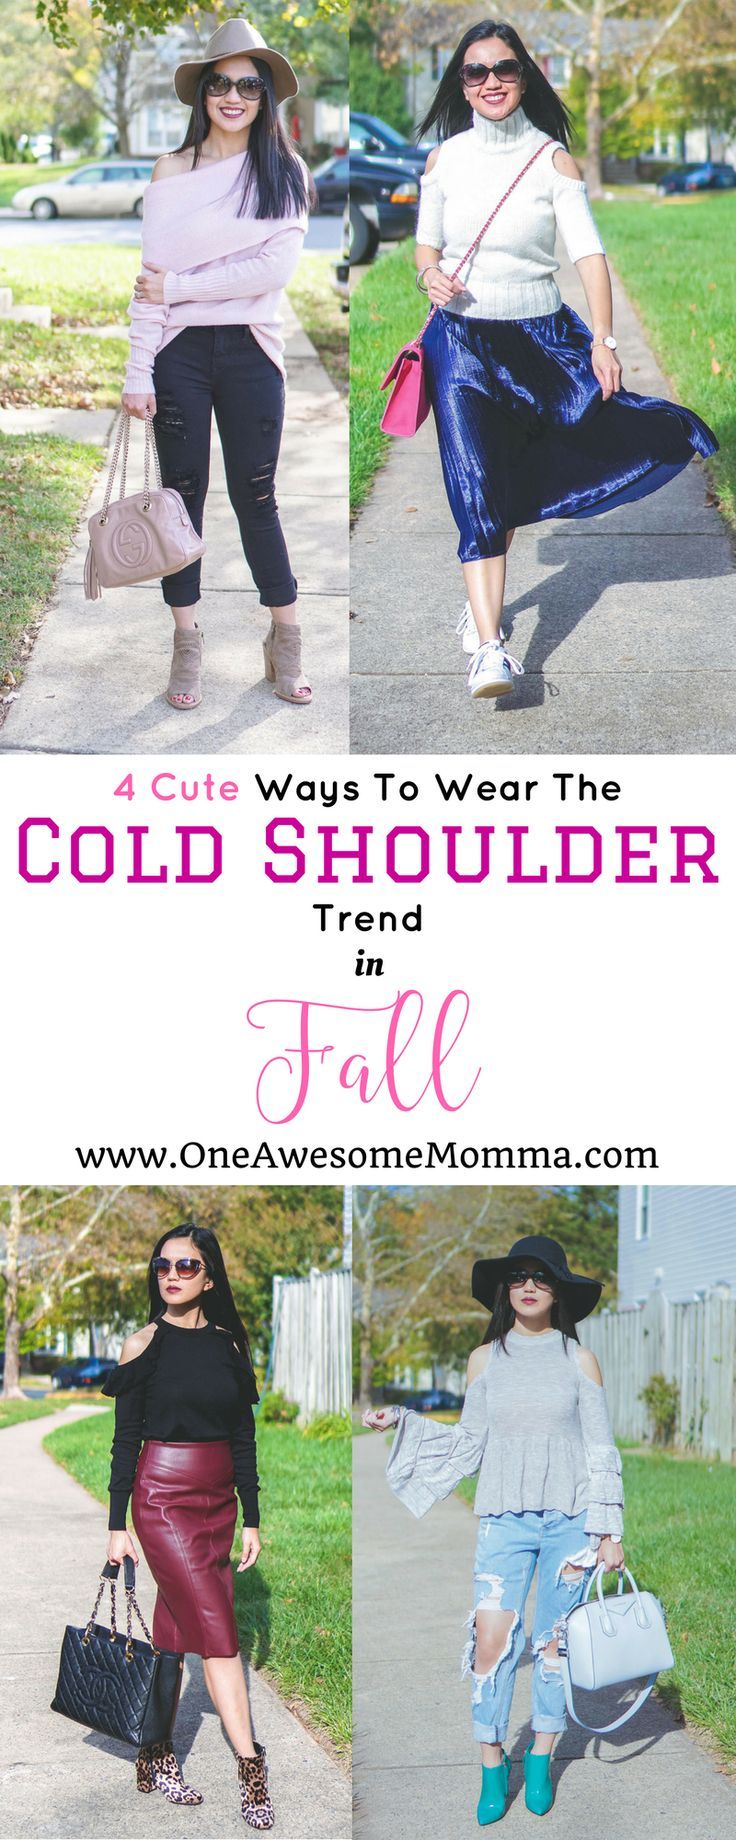 How To Wear The Cold Shoulder Trend In Fall